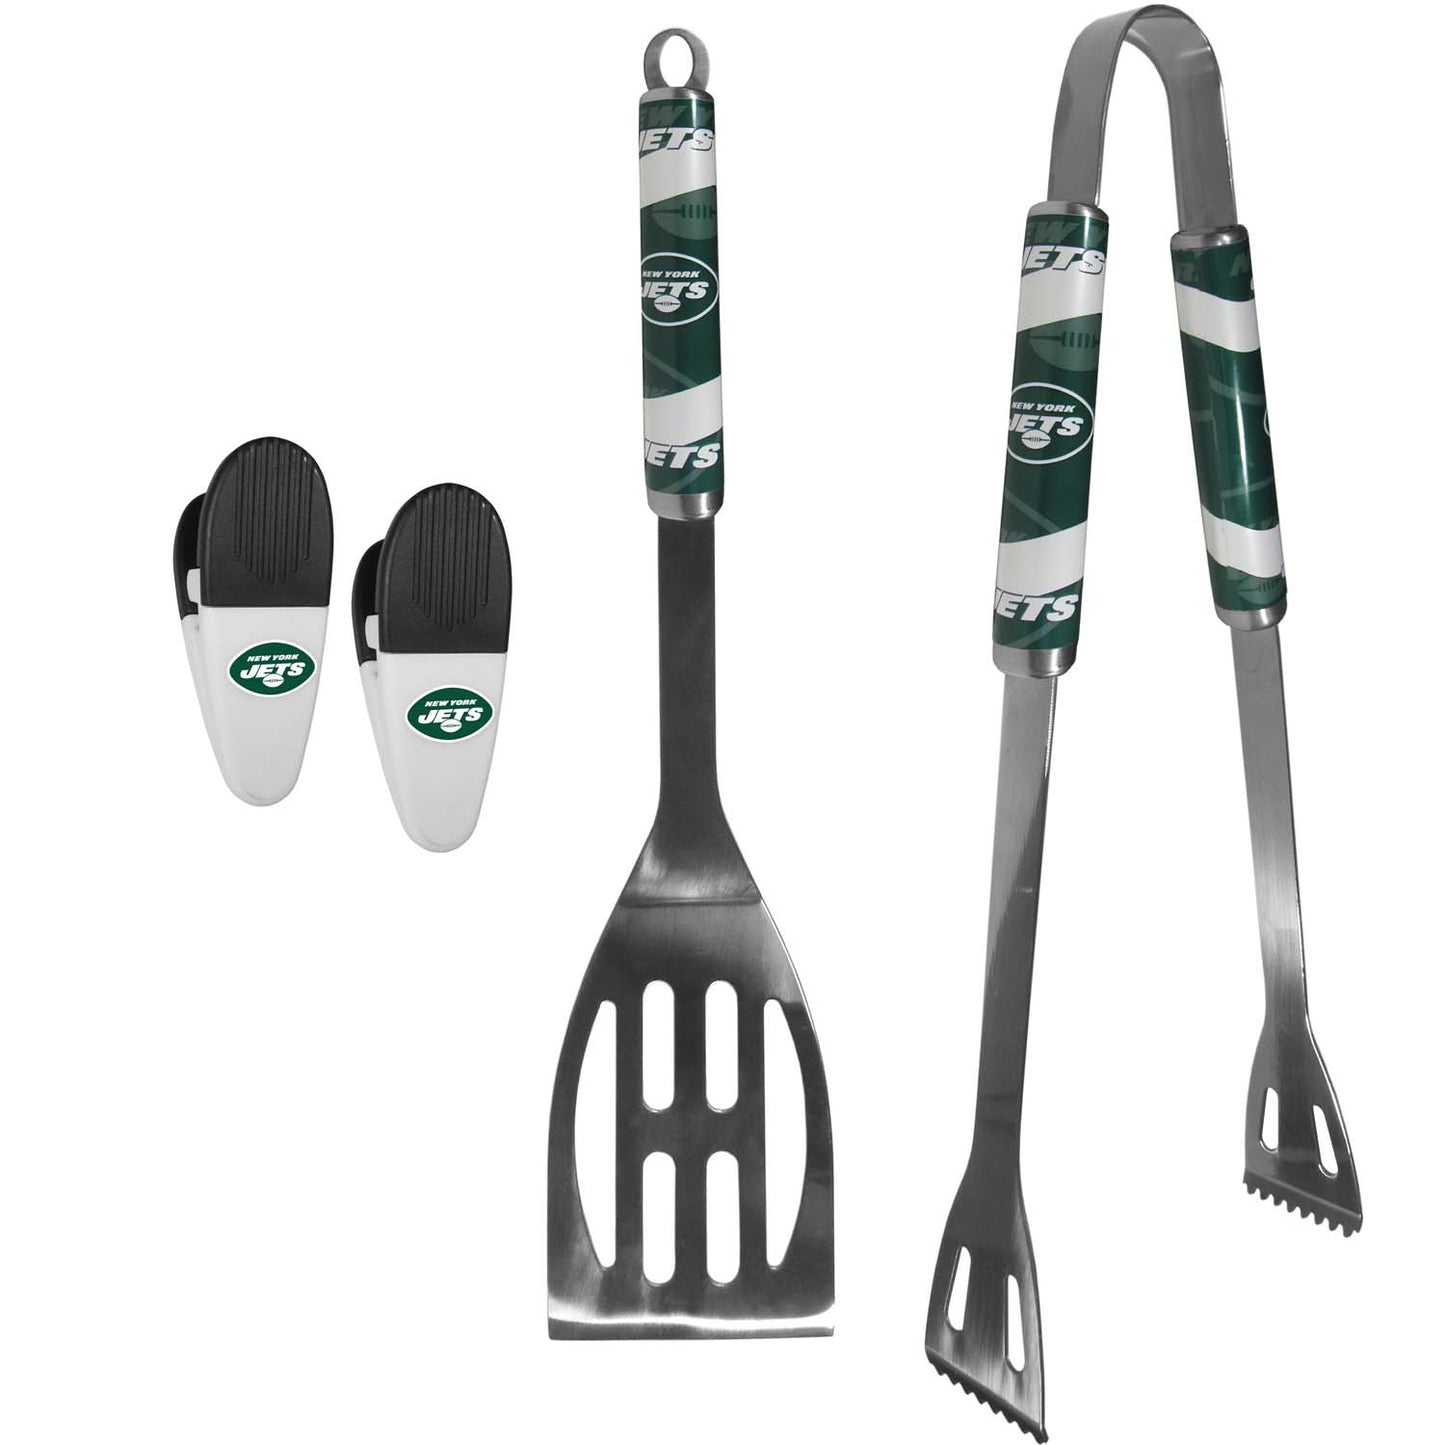 New York Jets NFL Two Piece Grilling Tools Set with 2 Magnet Chip Clips - Chrome